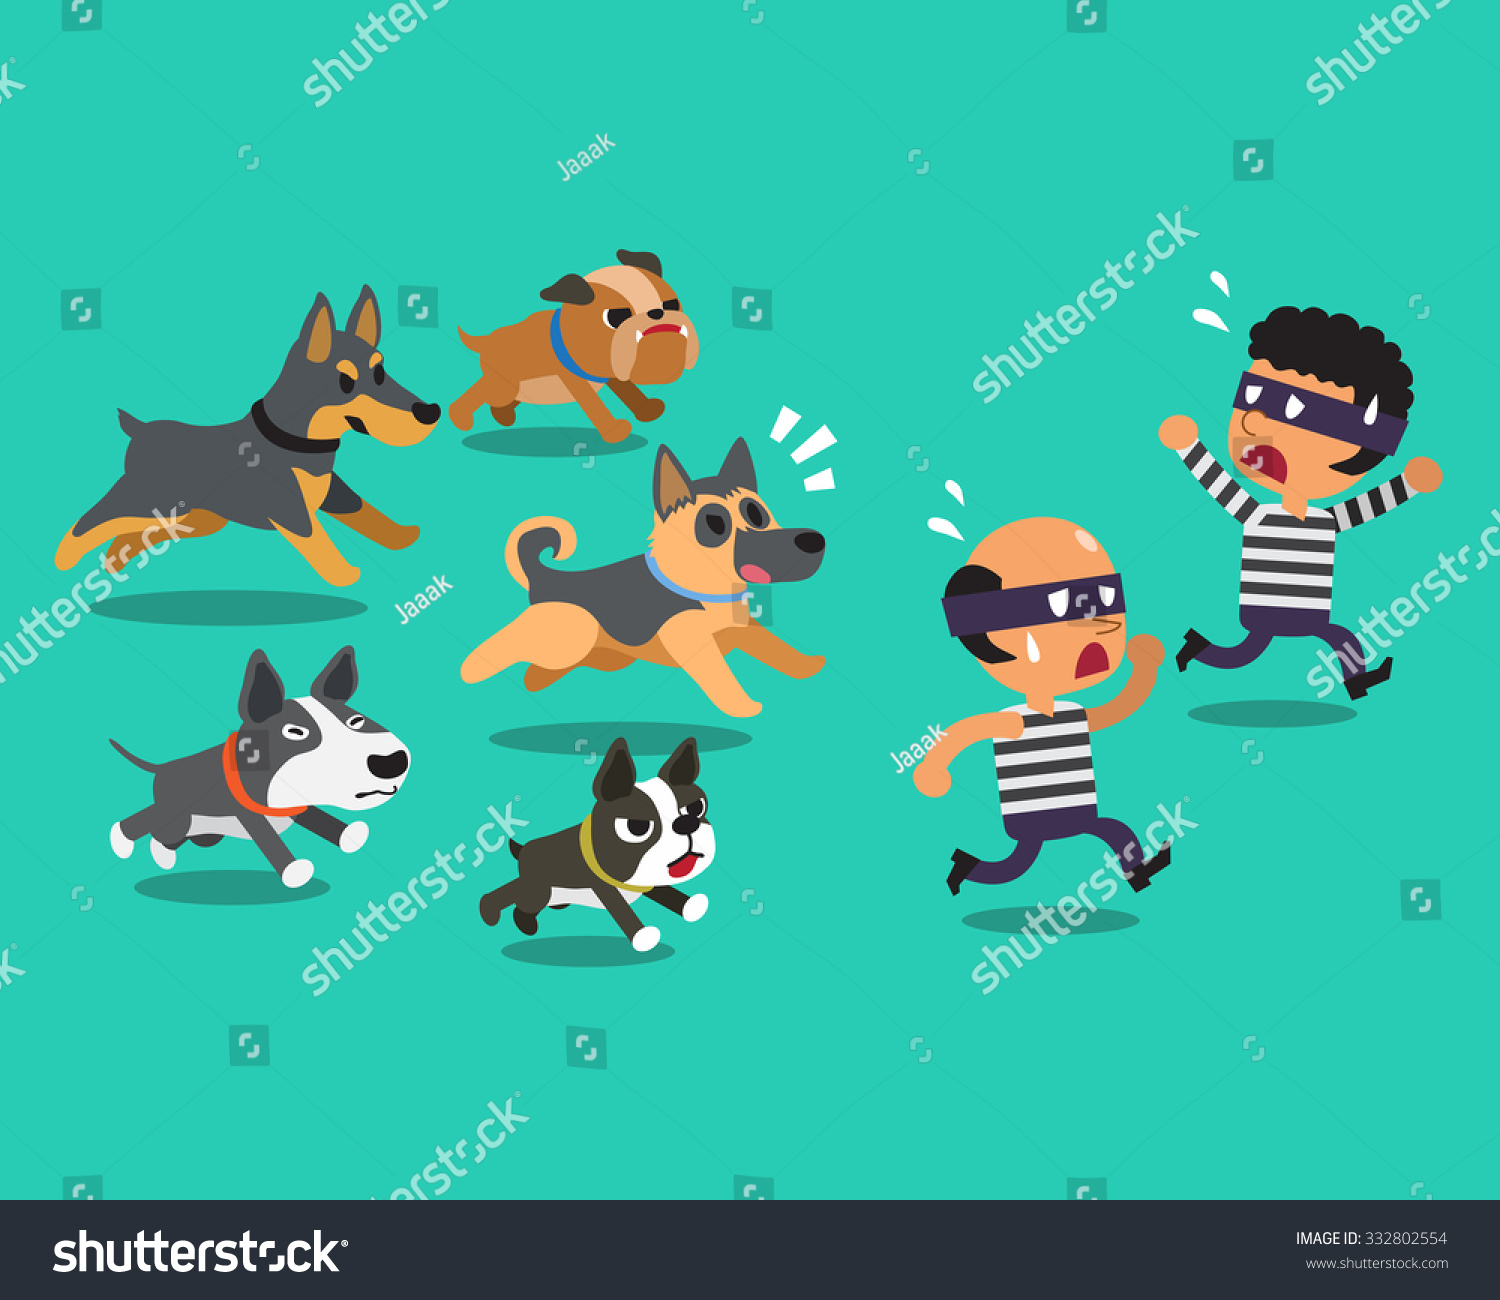 Cartoon Thieves And Guard Dogs Stock Vector Illustration 332802554